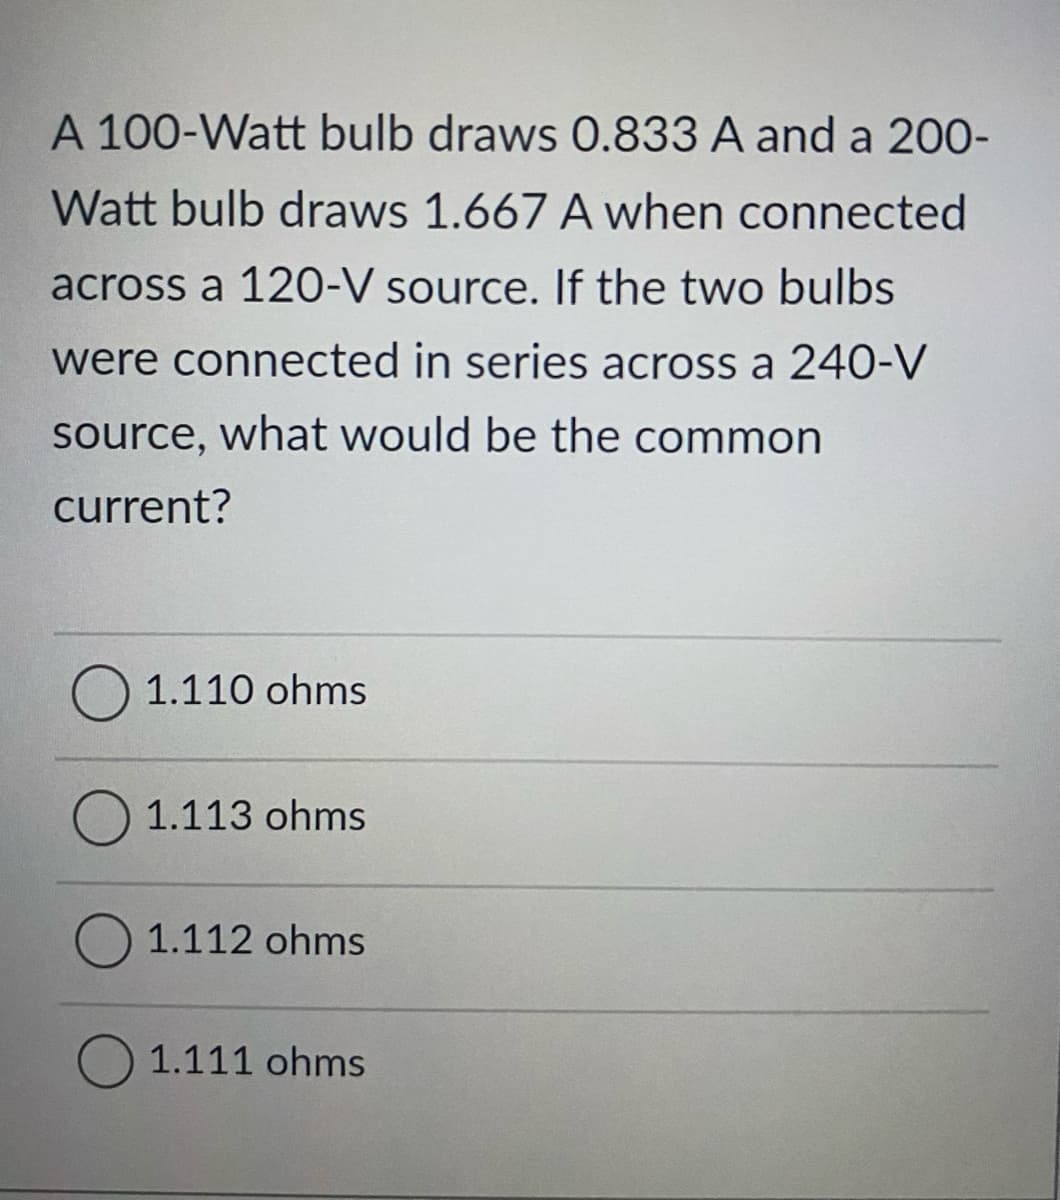 A 100-Watt bulb draws 0.833 A and a 200-
Watt bulb draws 1.667 A when connected
across a 120-V source. If the two bulbs
were connected in series across a 240-V
source, what would be the common
current?
1.110 ohms
O 1.113 ohms
1.112 ohms
O 1.111 ohms
